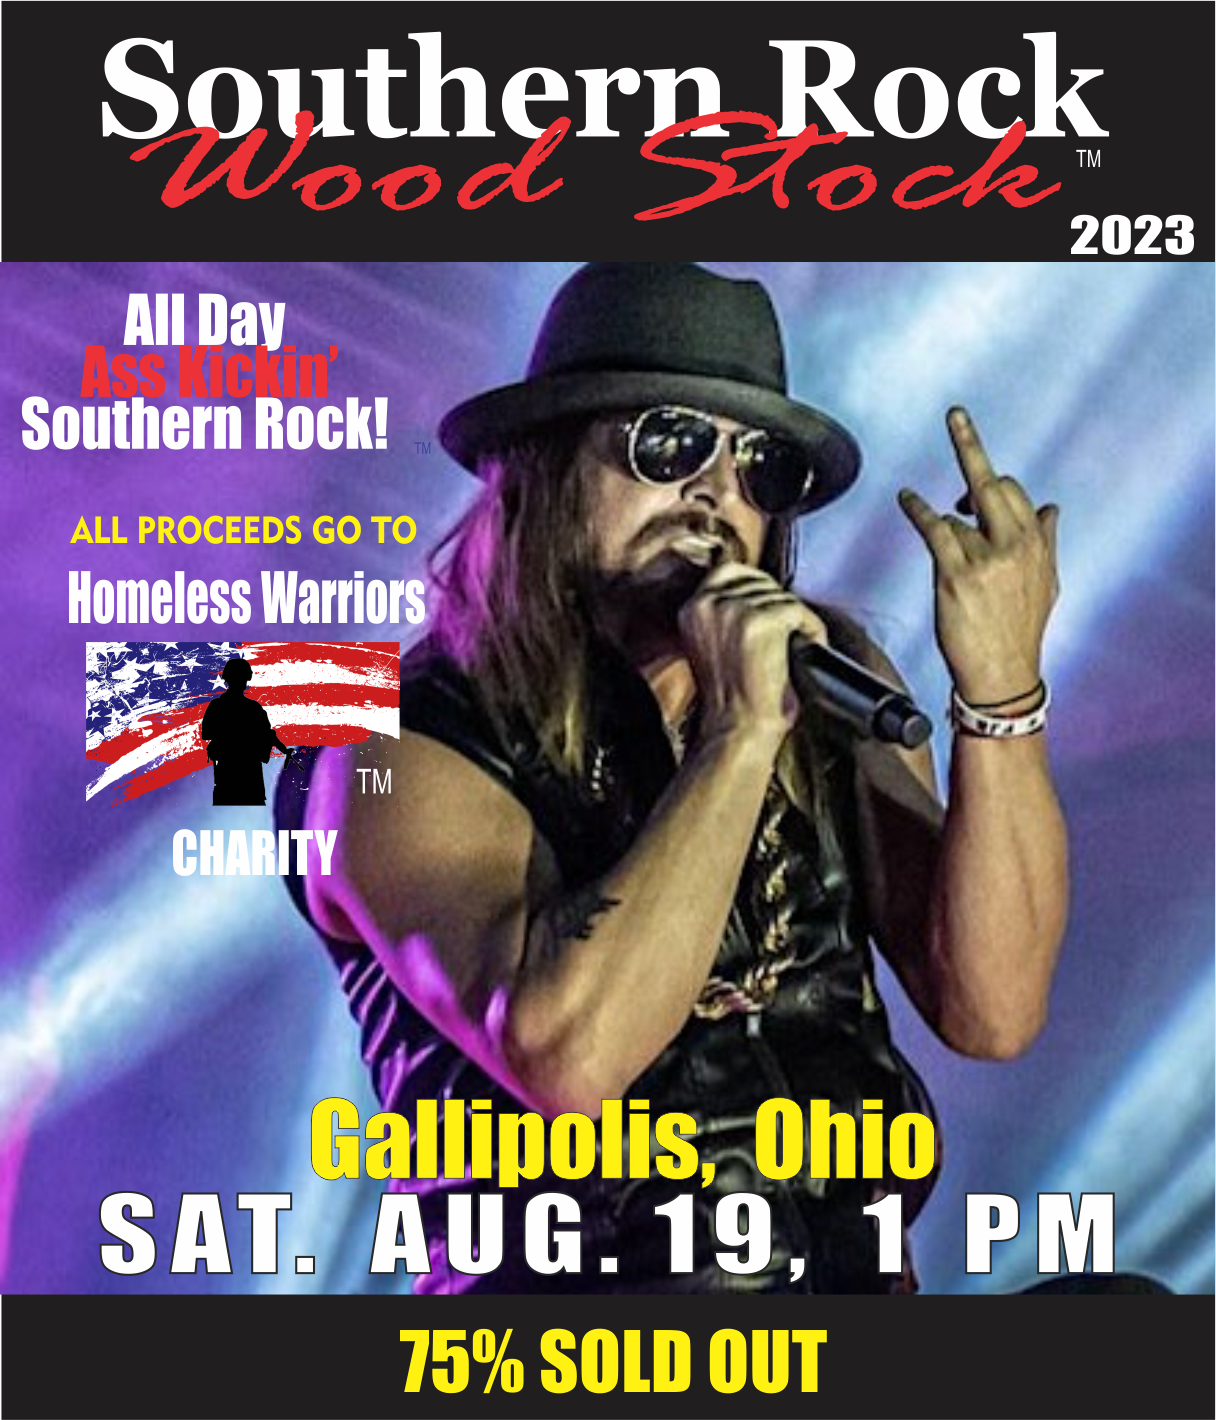 Southern Ohio Southern Rock Wood Stock 2023 Southern Ohio & West Virginia on Aug 19, 13:00@Gallia County Fairgrounds - Buy tickets and Get information on www.southernrockwoodstock.com southernrockwoodstock